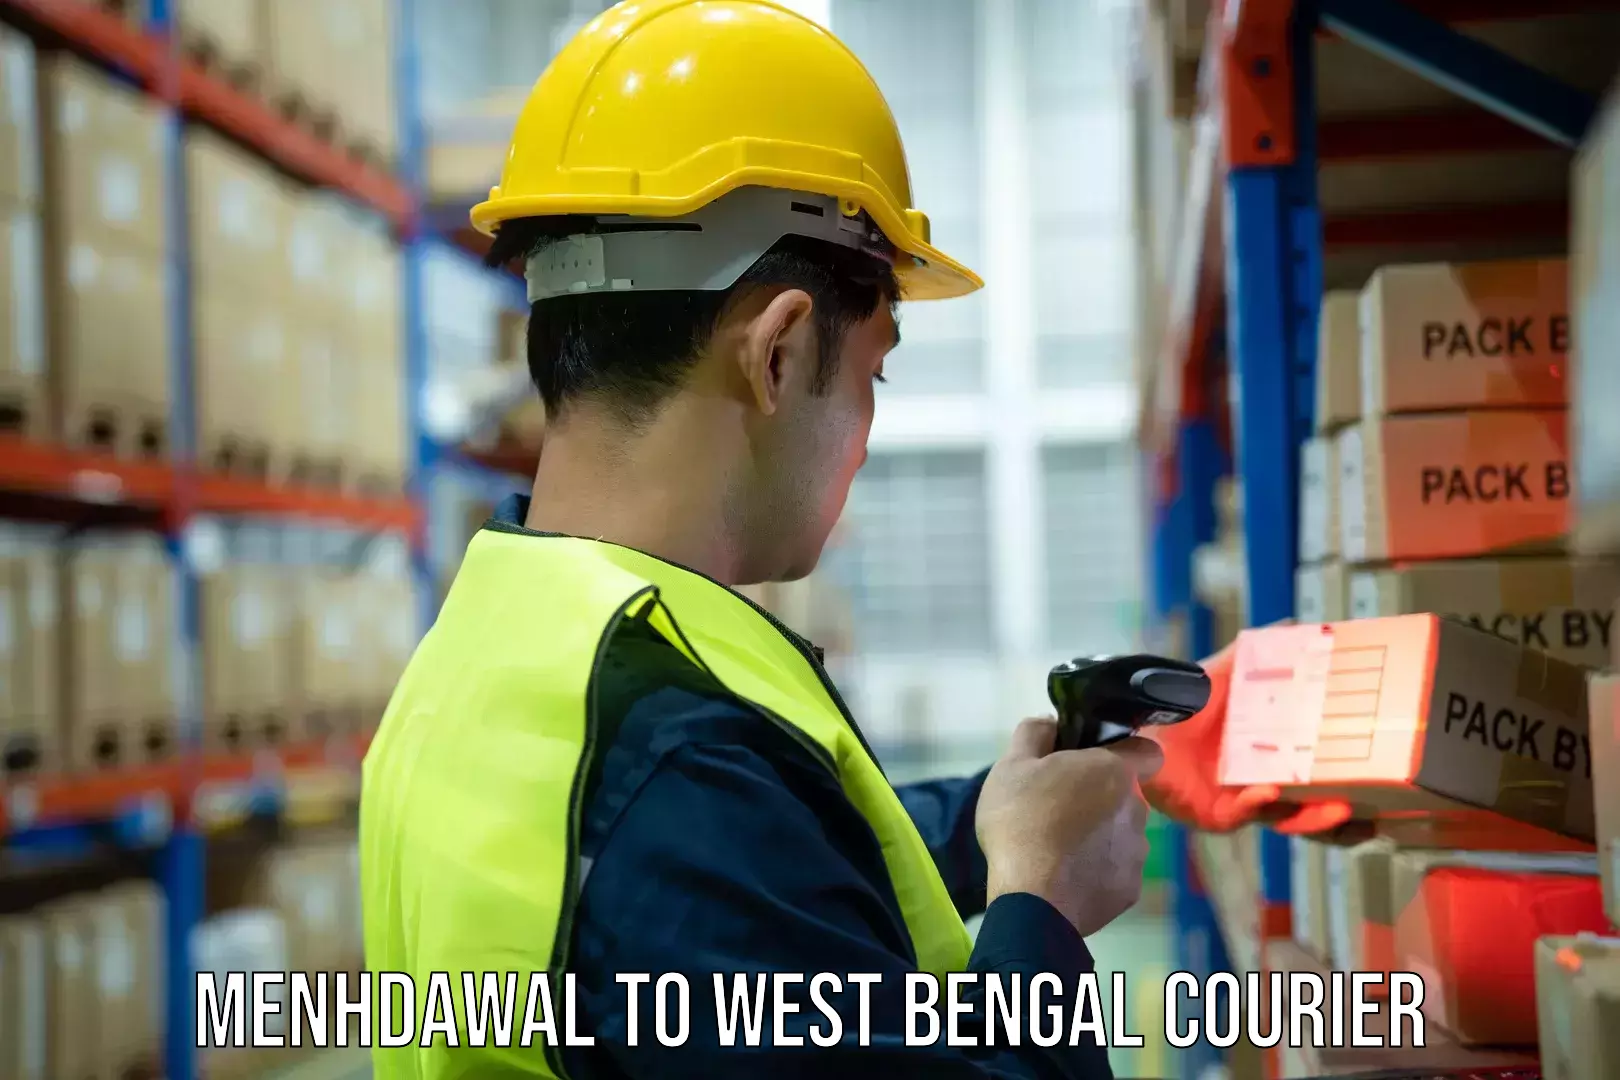 User-friendly delivery service Menhdawal to Purba Medinipur